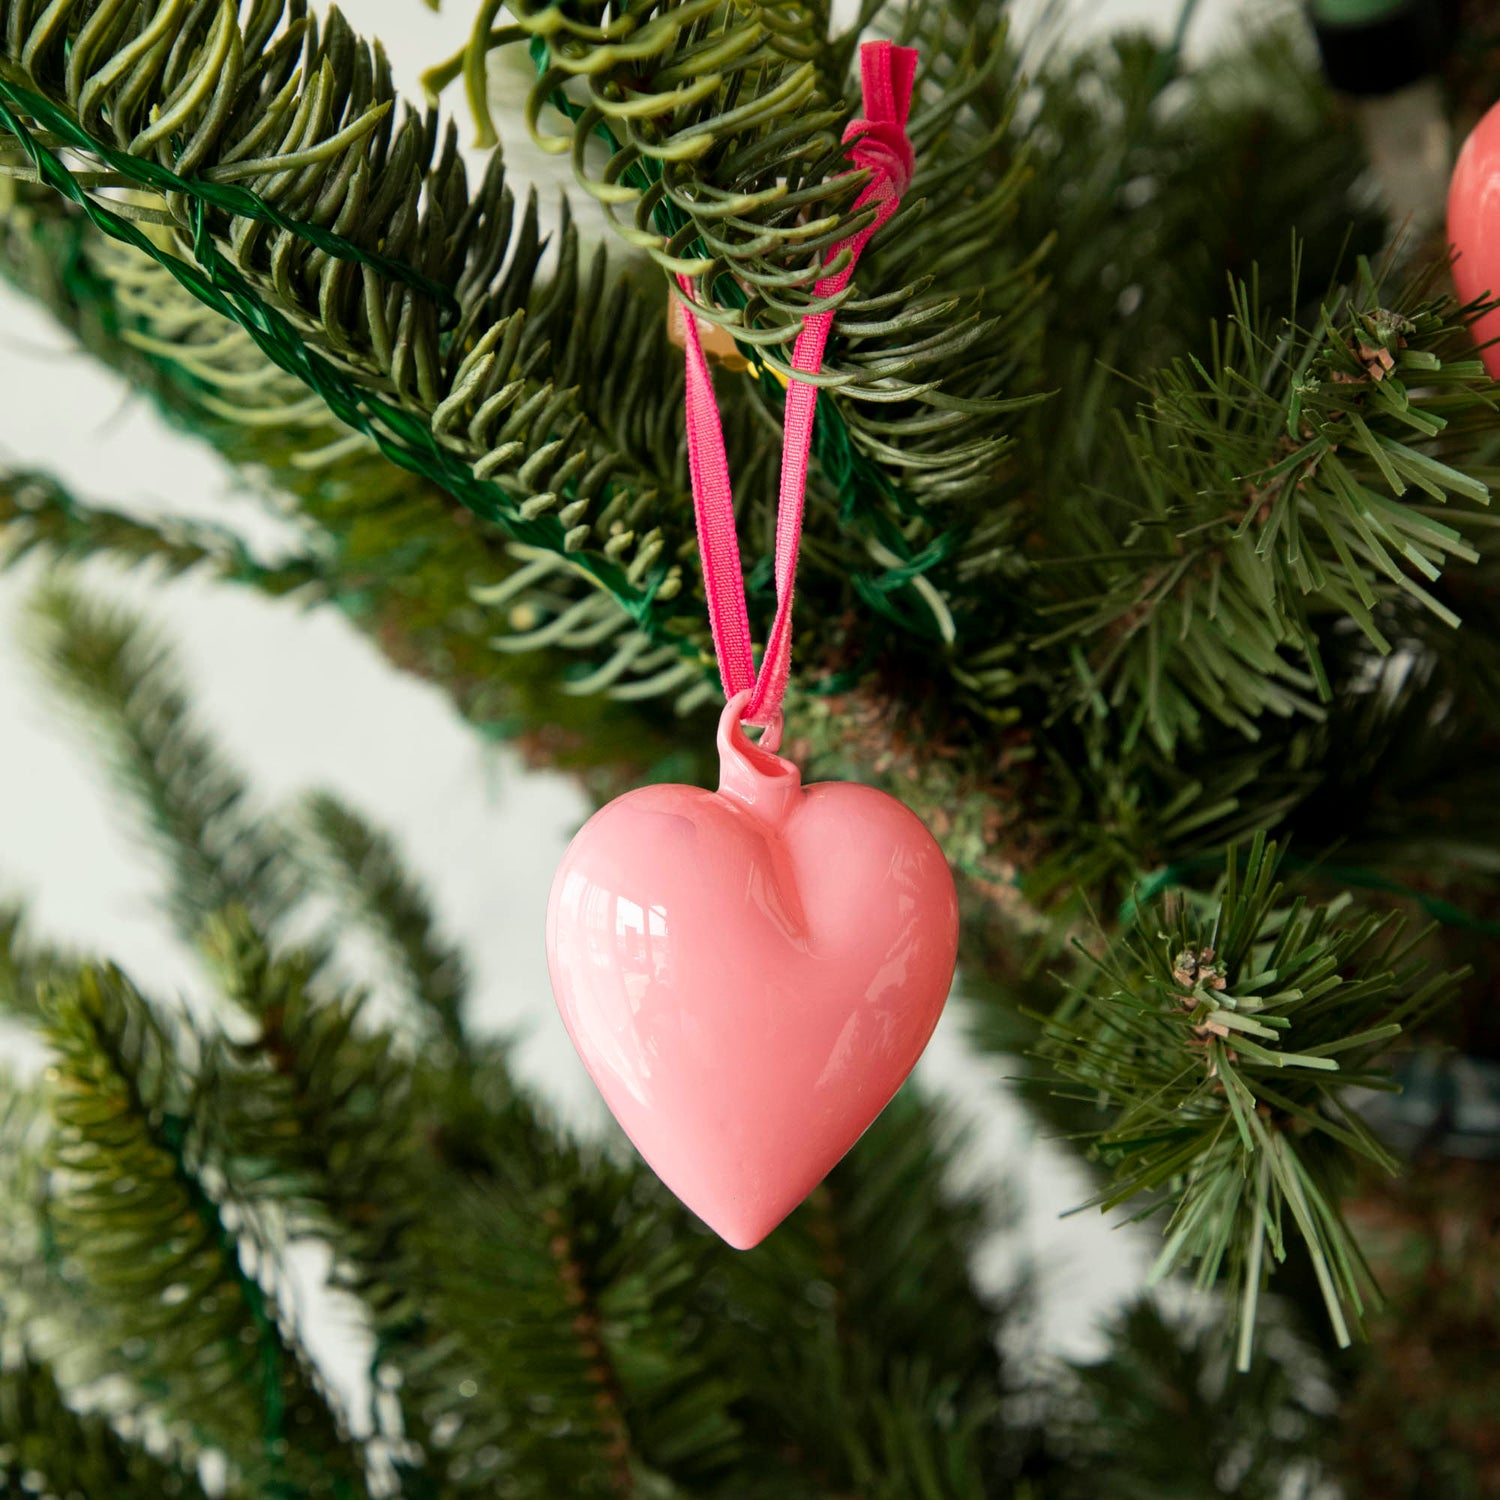 Vibrant Glitterville heart ornaments hanging on a Christmas tree.